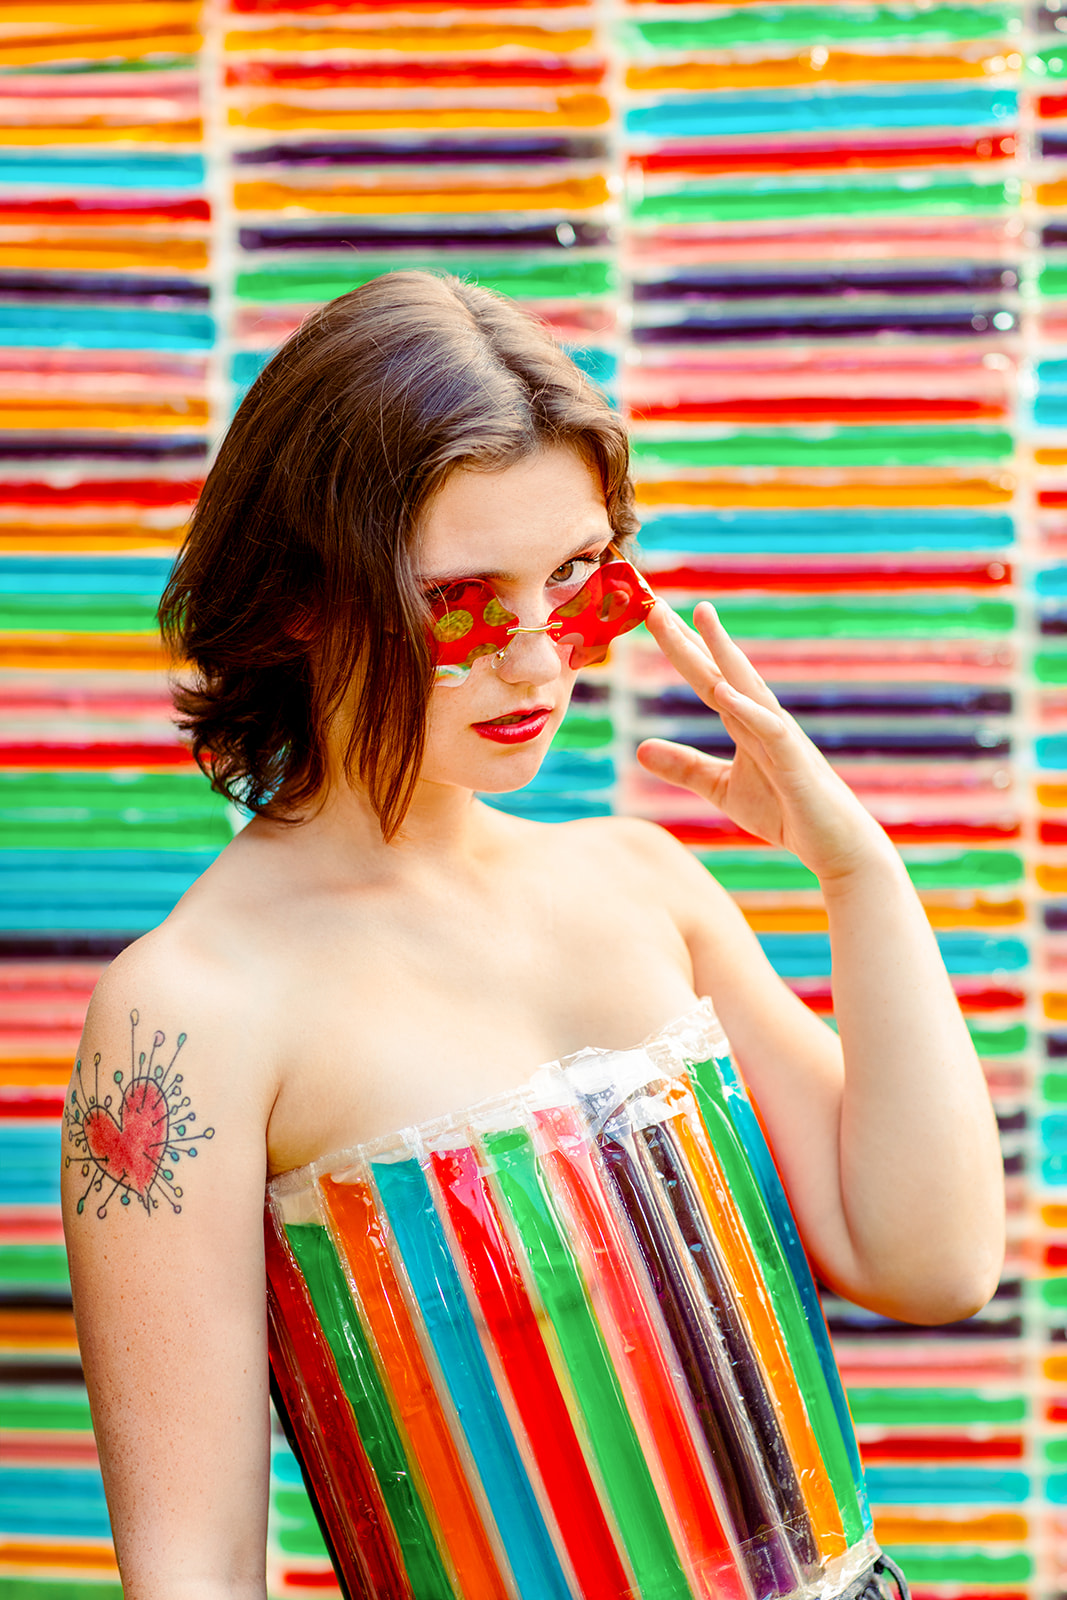 Creating a Colorful Photoshoot Backdrop Out of Popsicles - Jada And David Parrish